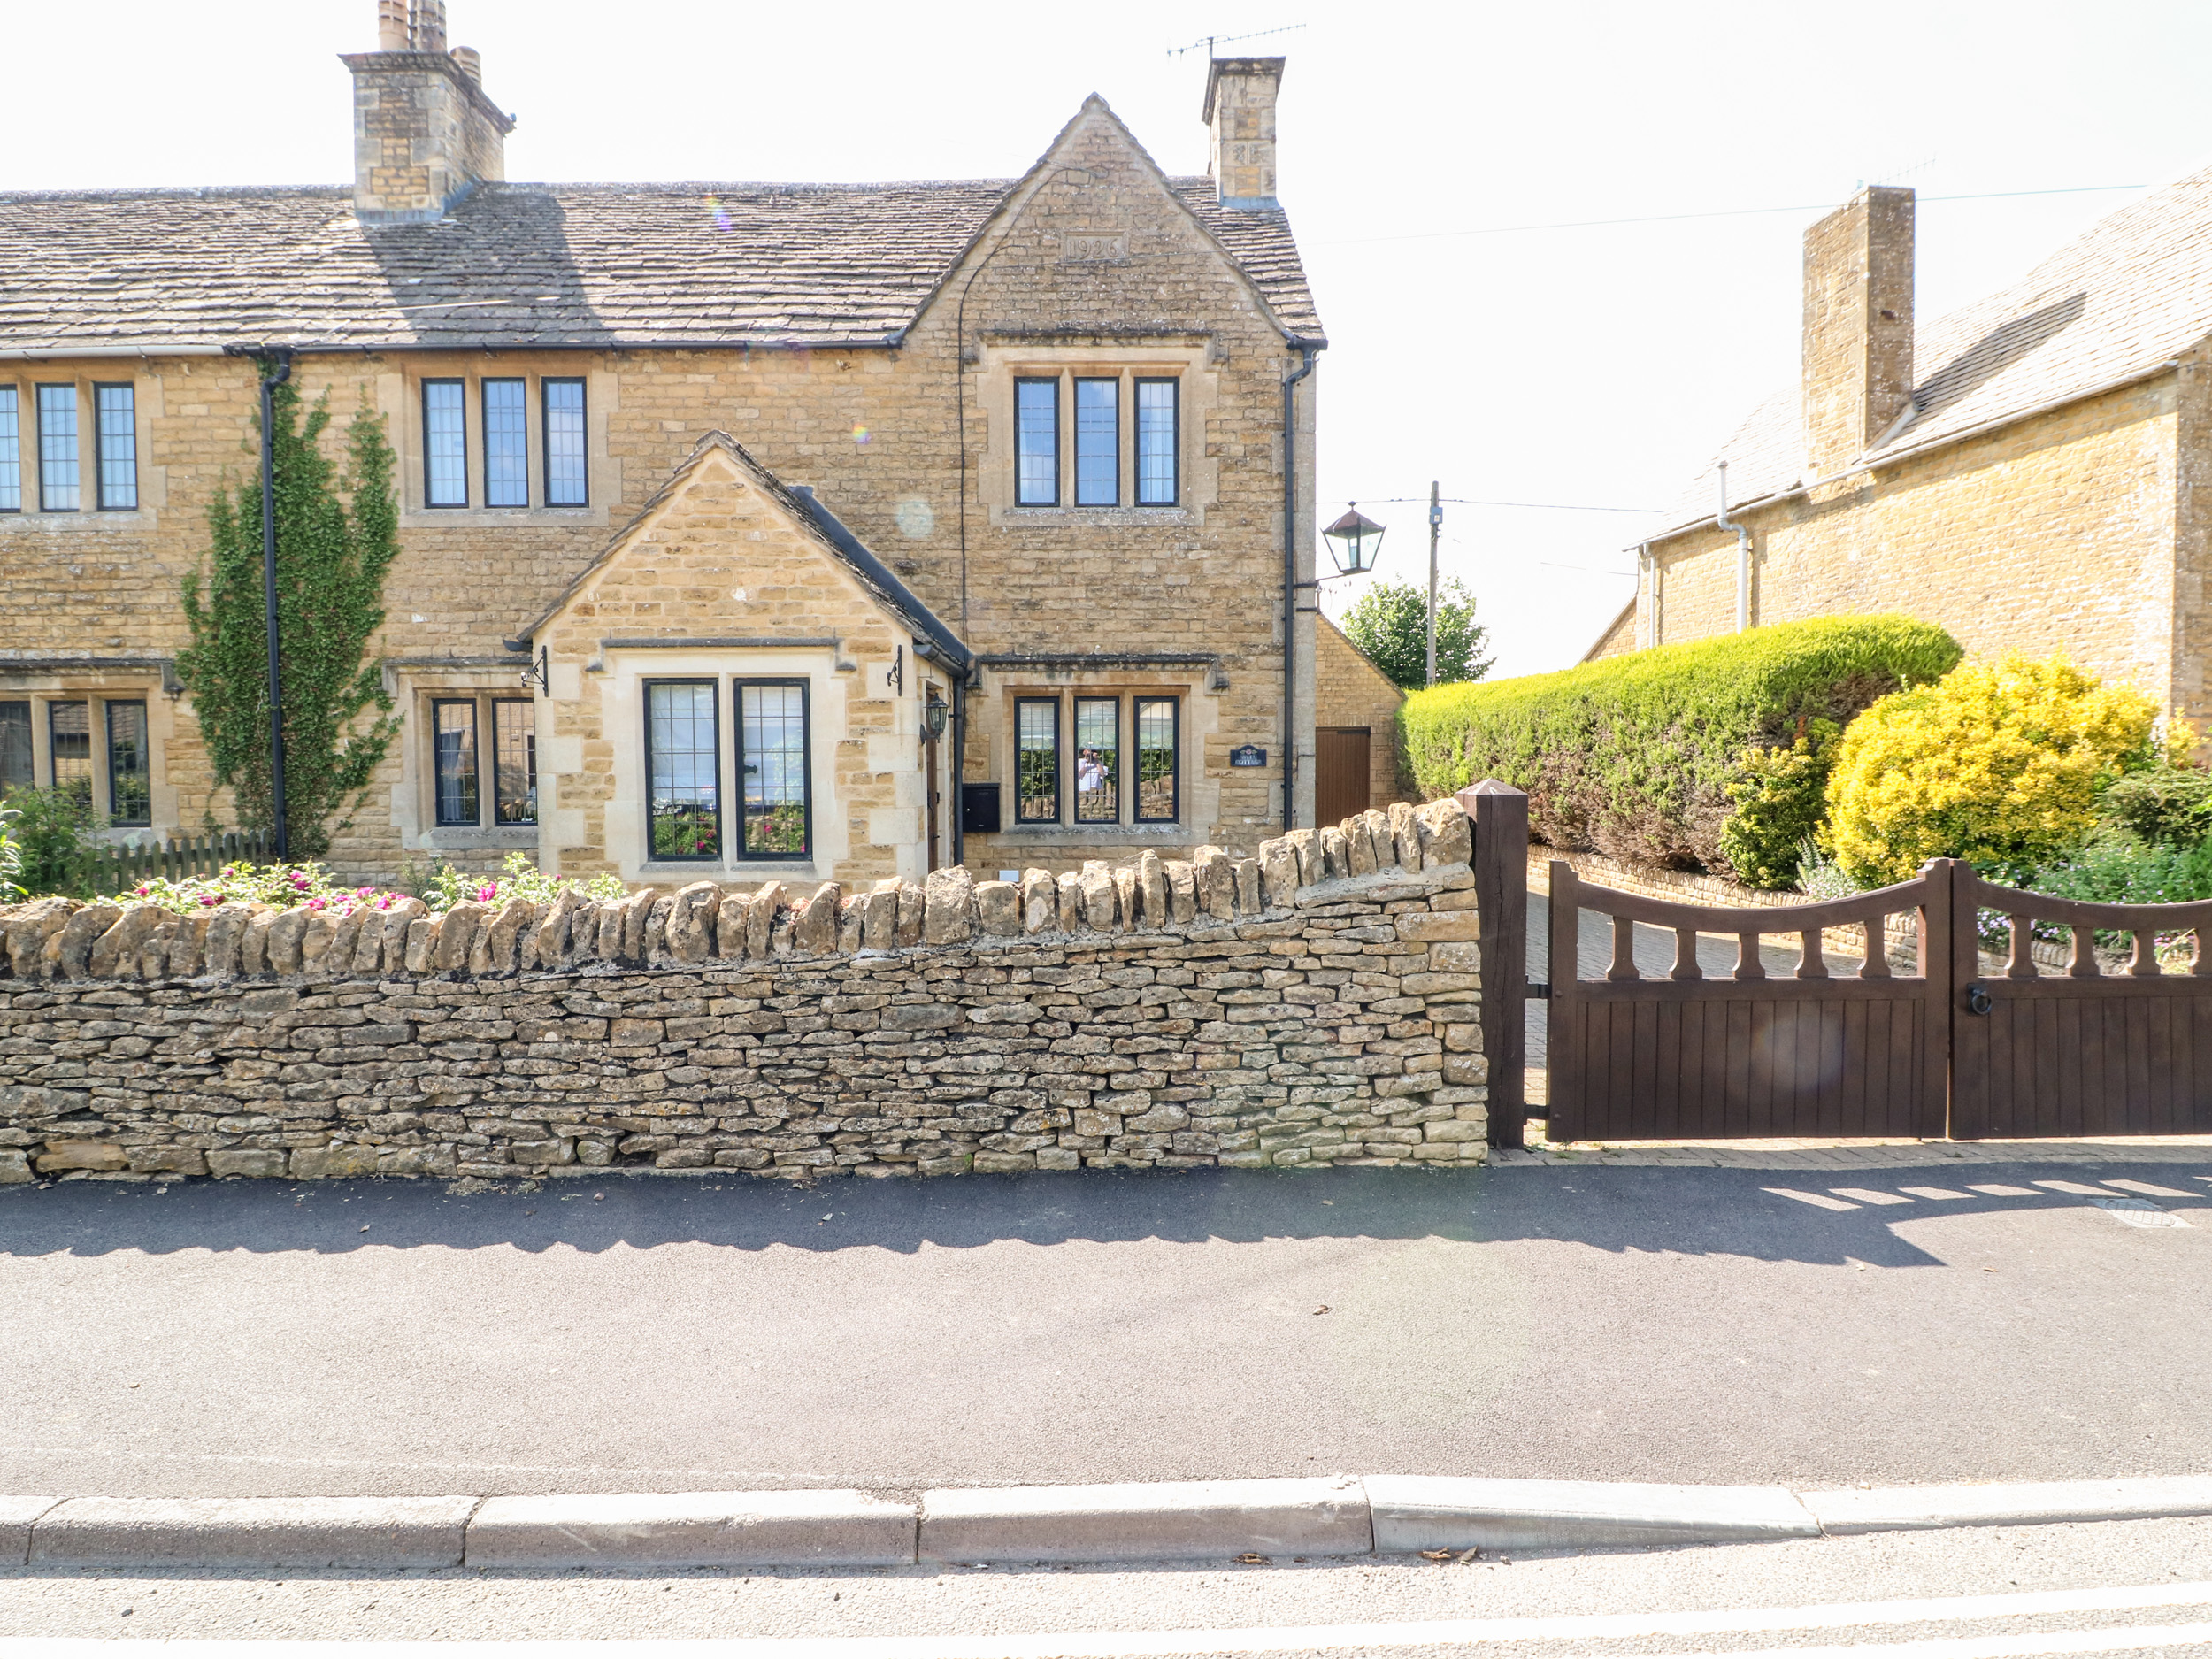 4 bedroom Cottage for rent in Bourton on the Water